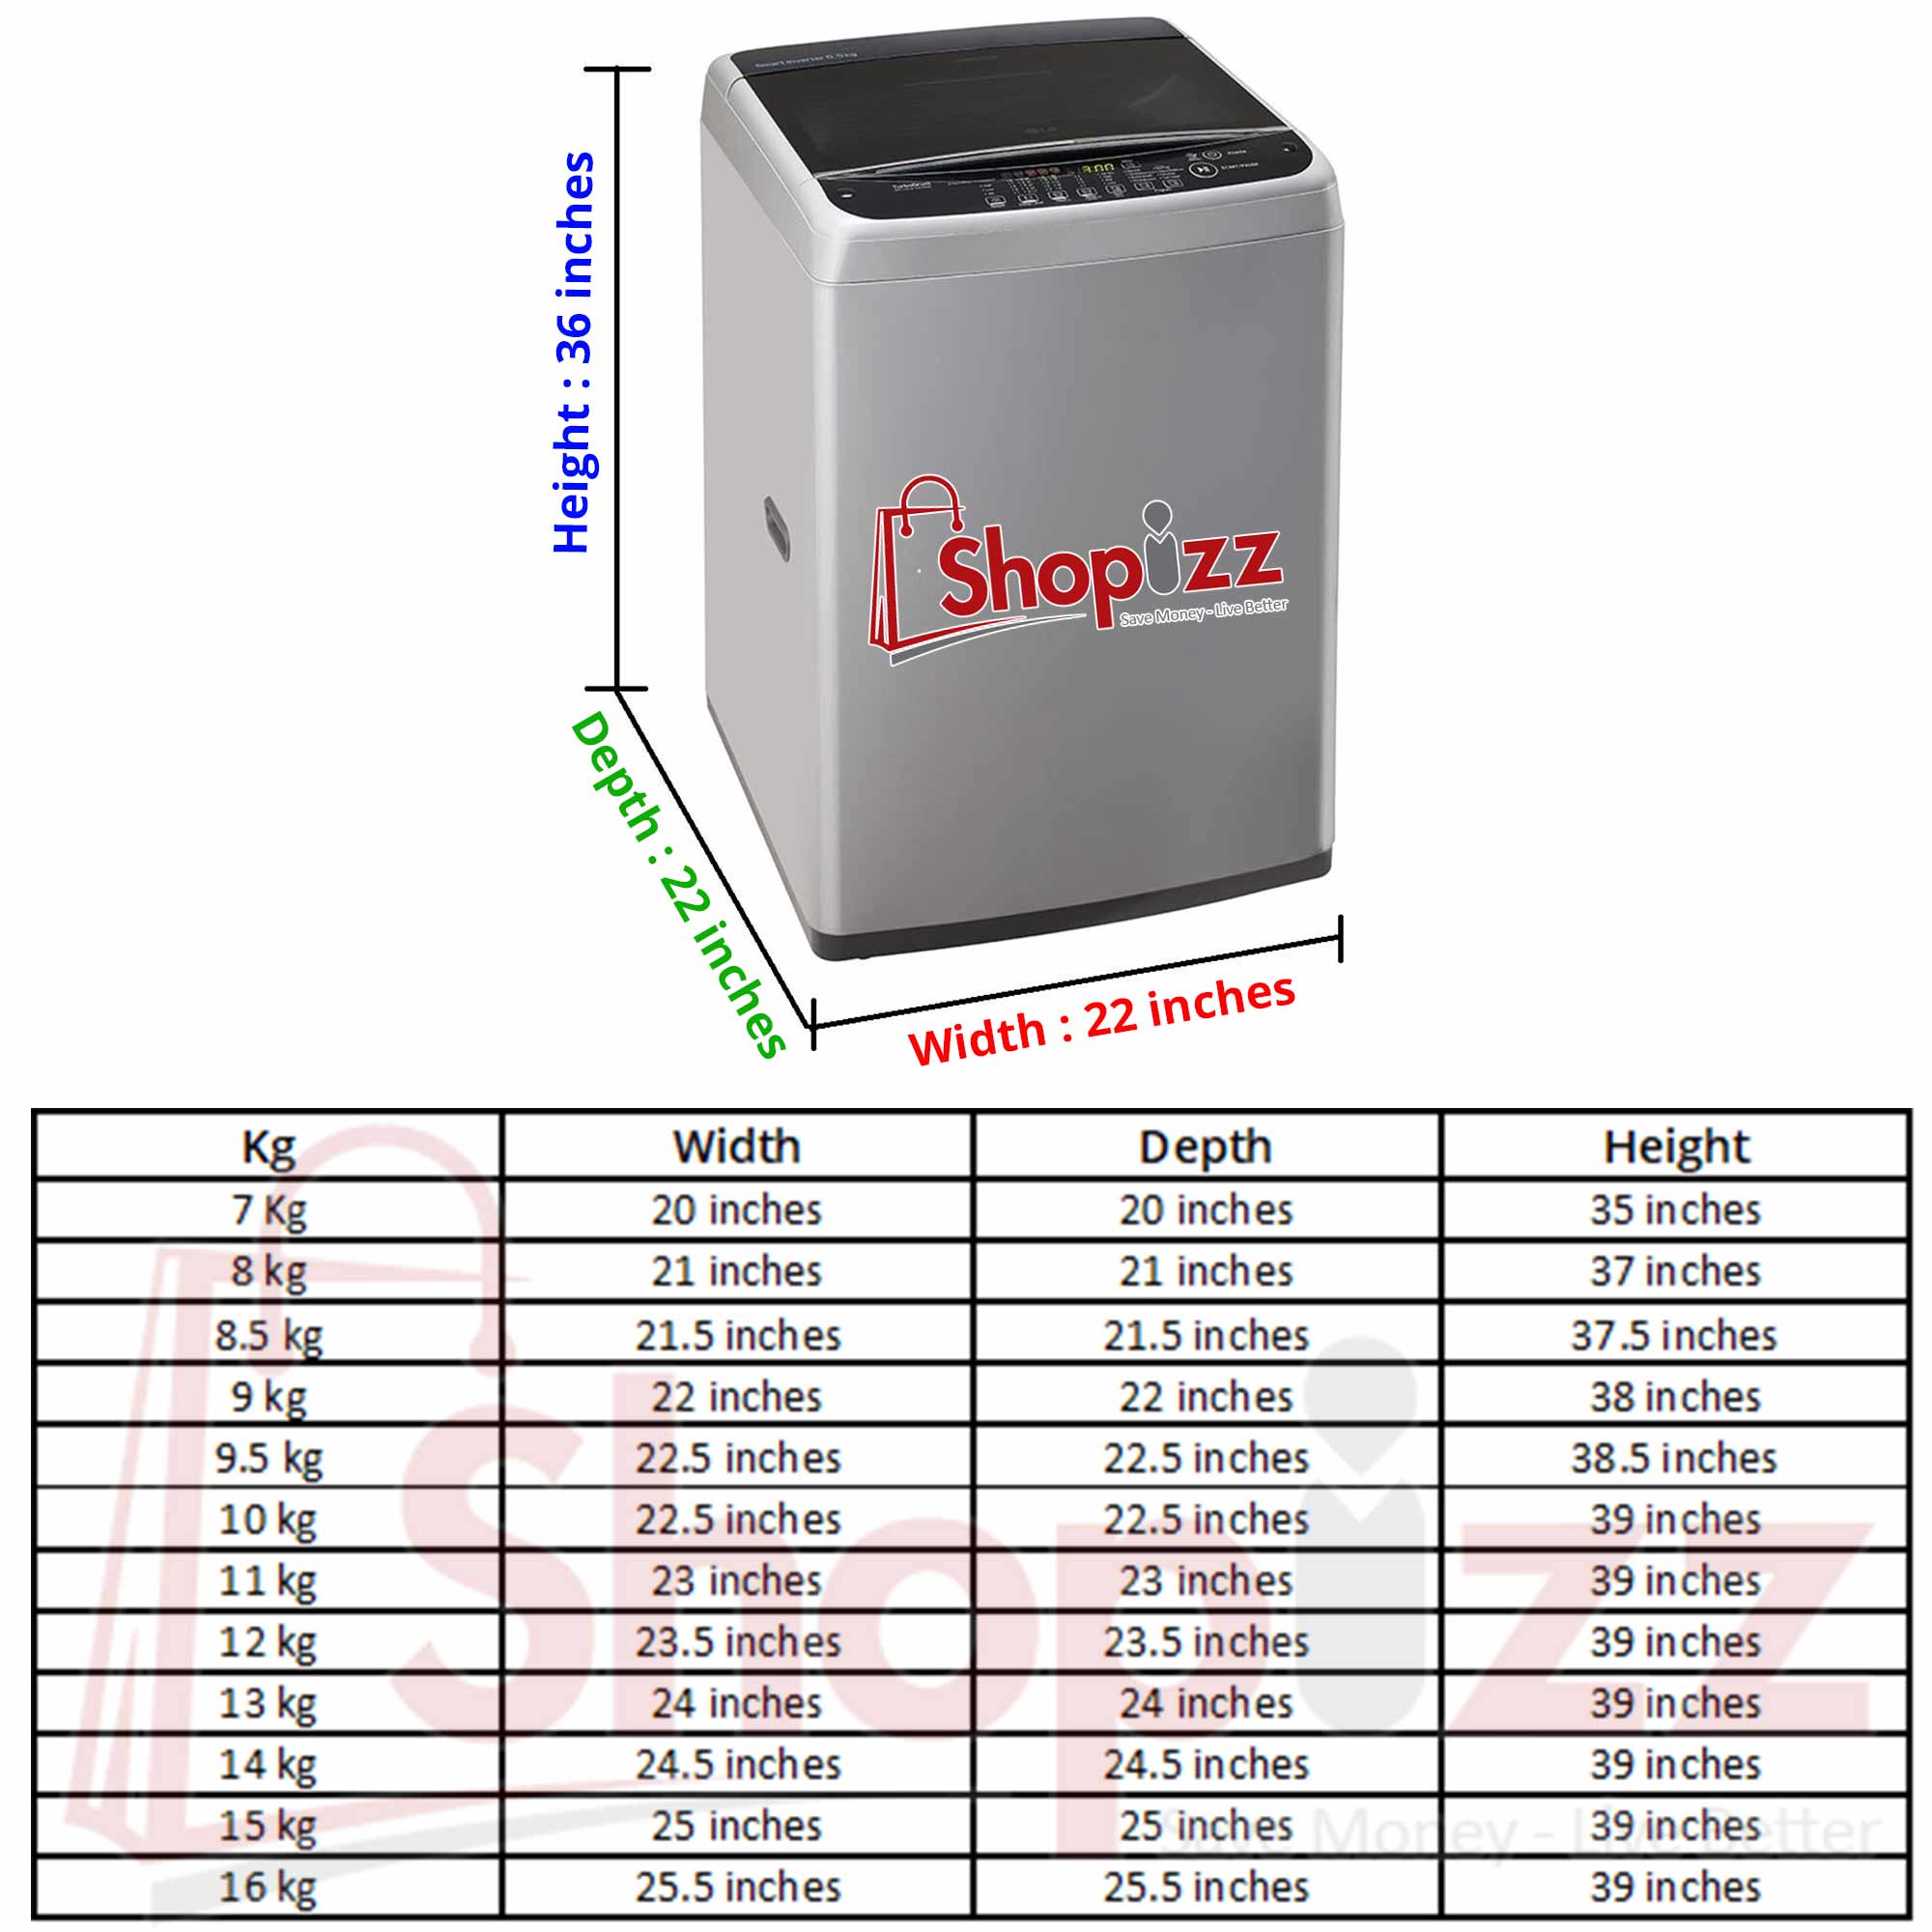 Zipper Waterproof Washing Machine Cover Top Loaded White Color – All Sizes available